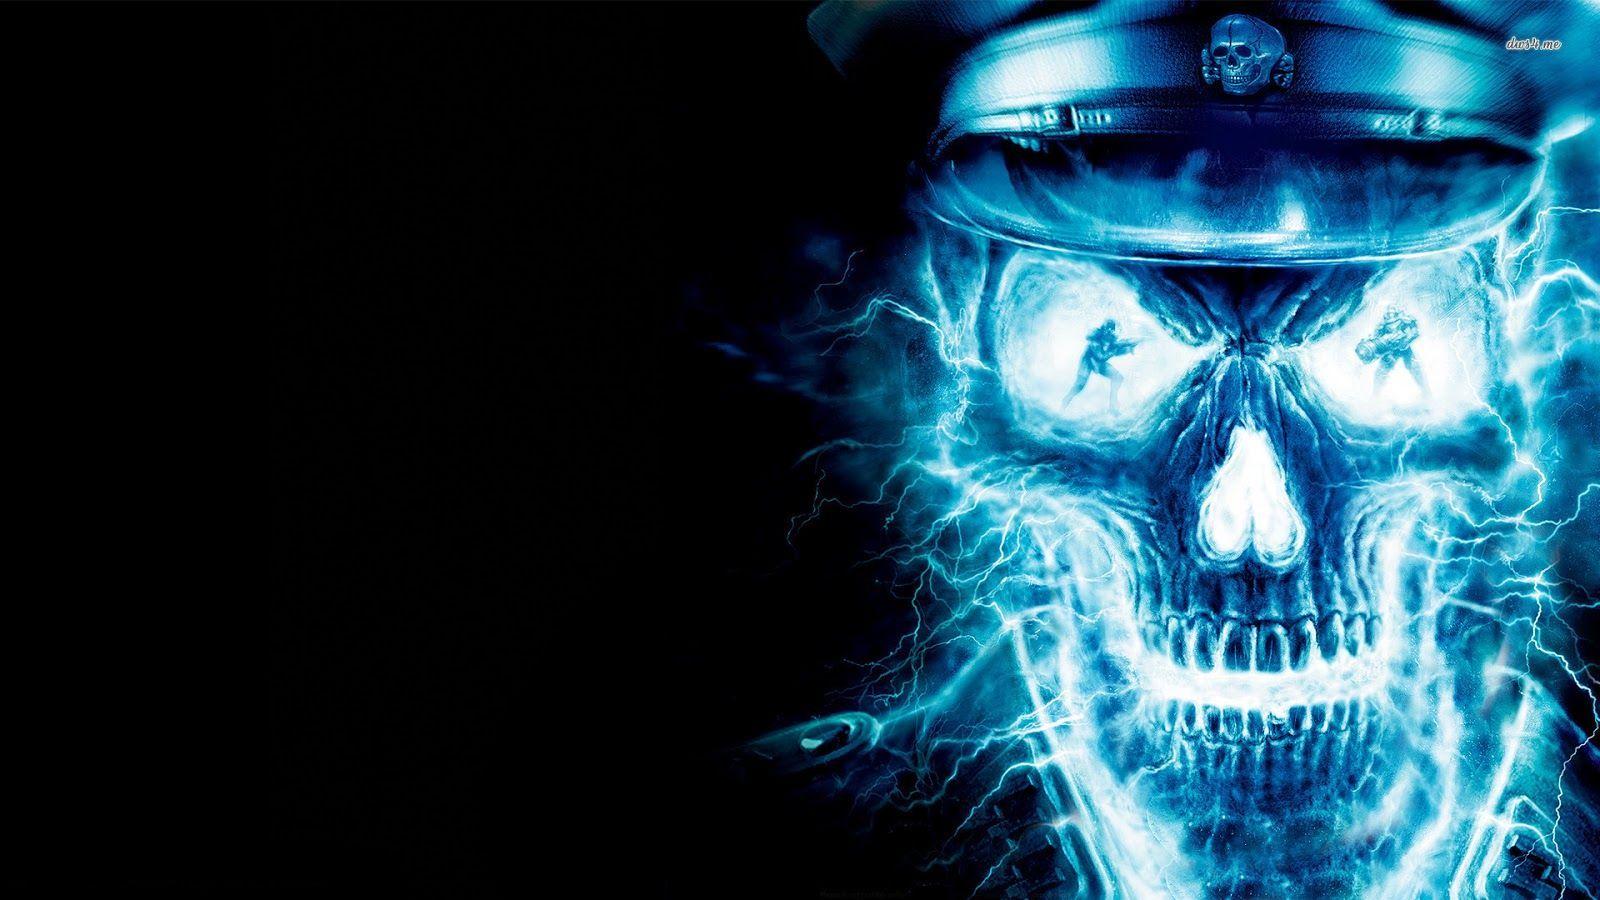 Chrionex: EDM Wallpaper and Posters. Ghost rider wallpaper, HD